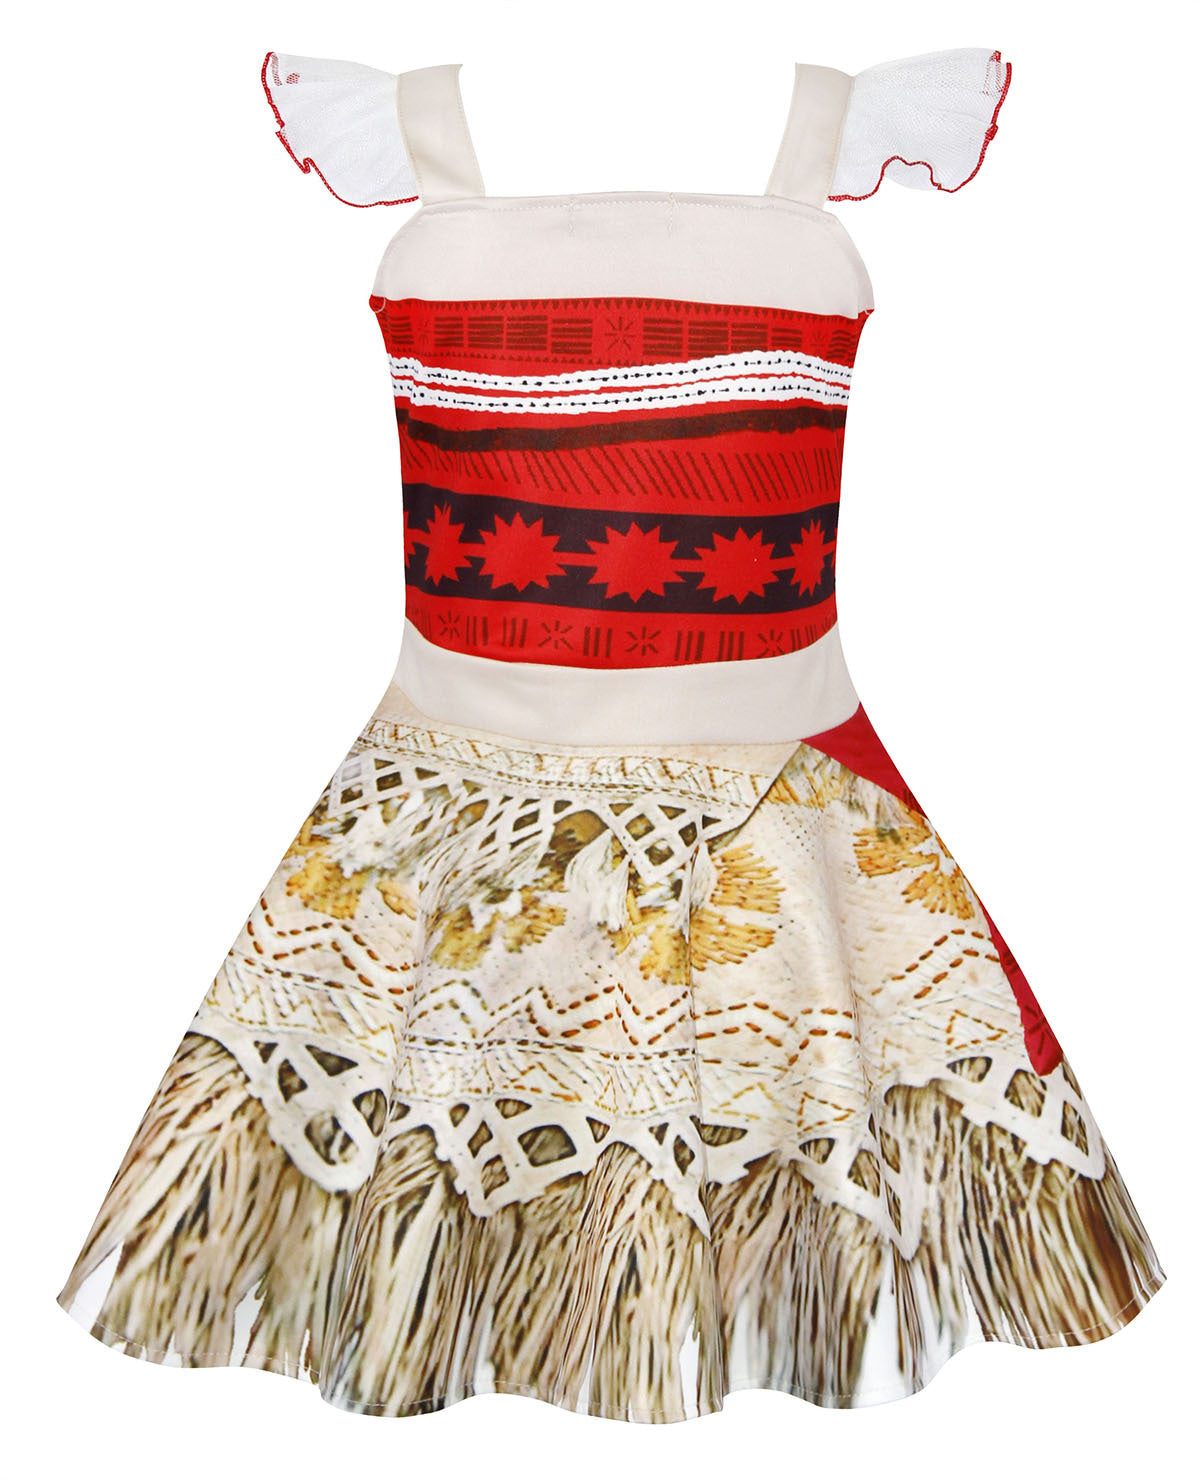 Moana Costume for Kids (Red)